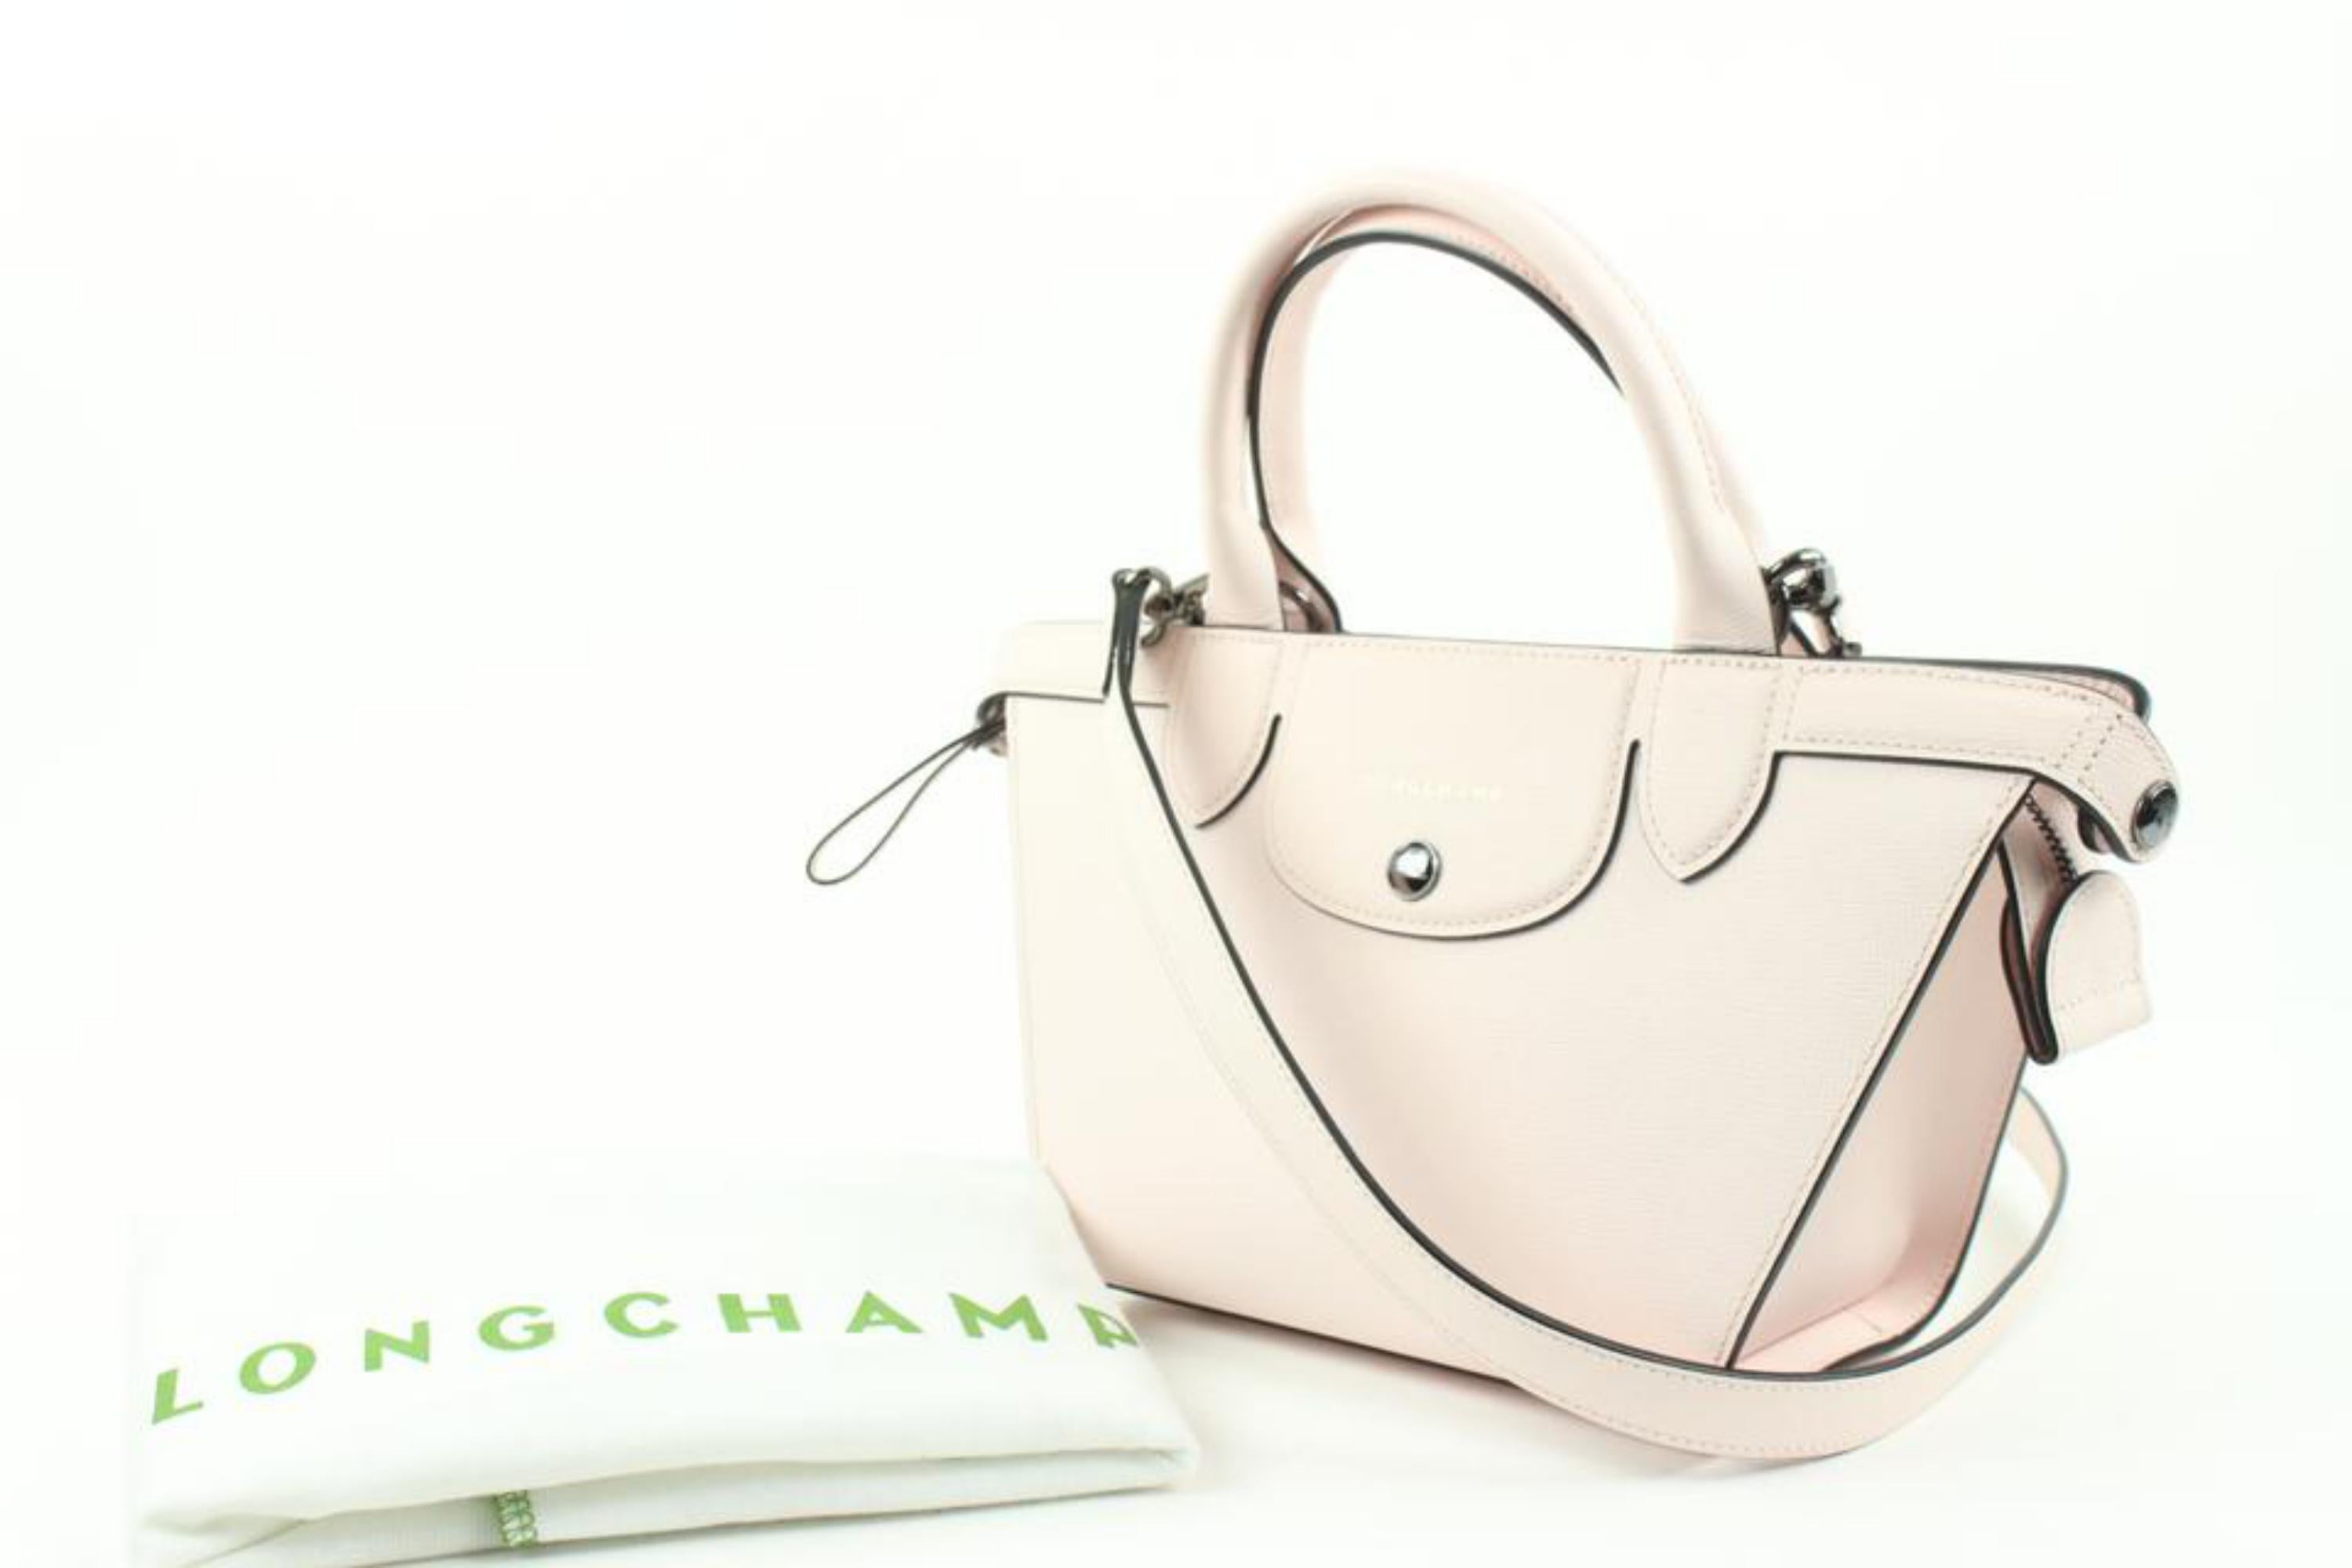 Longchamp Light Pink Leather Extra Small Le Pliage 2way Tote Bag 11lc113
Date Code/Serial Number: 1056540 11168113C59
Made In: China
Measurements: Length: 13 